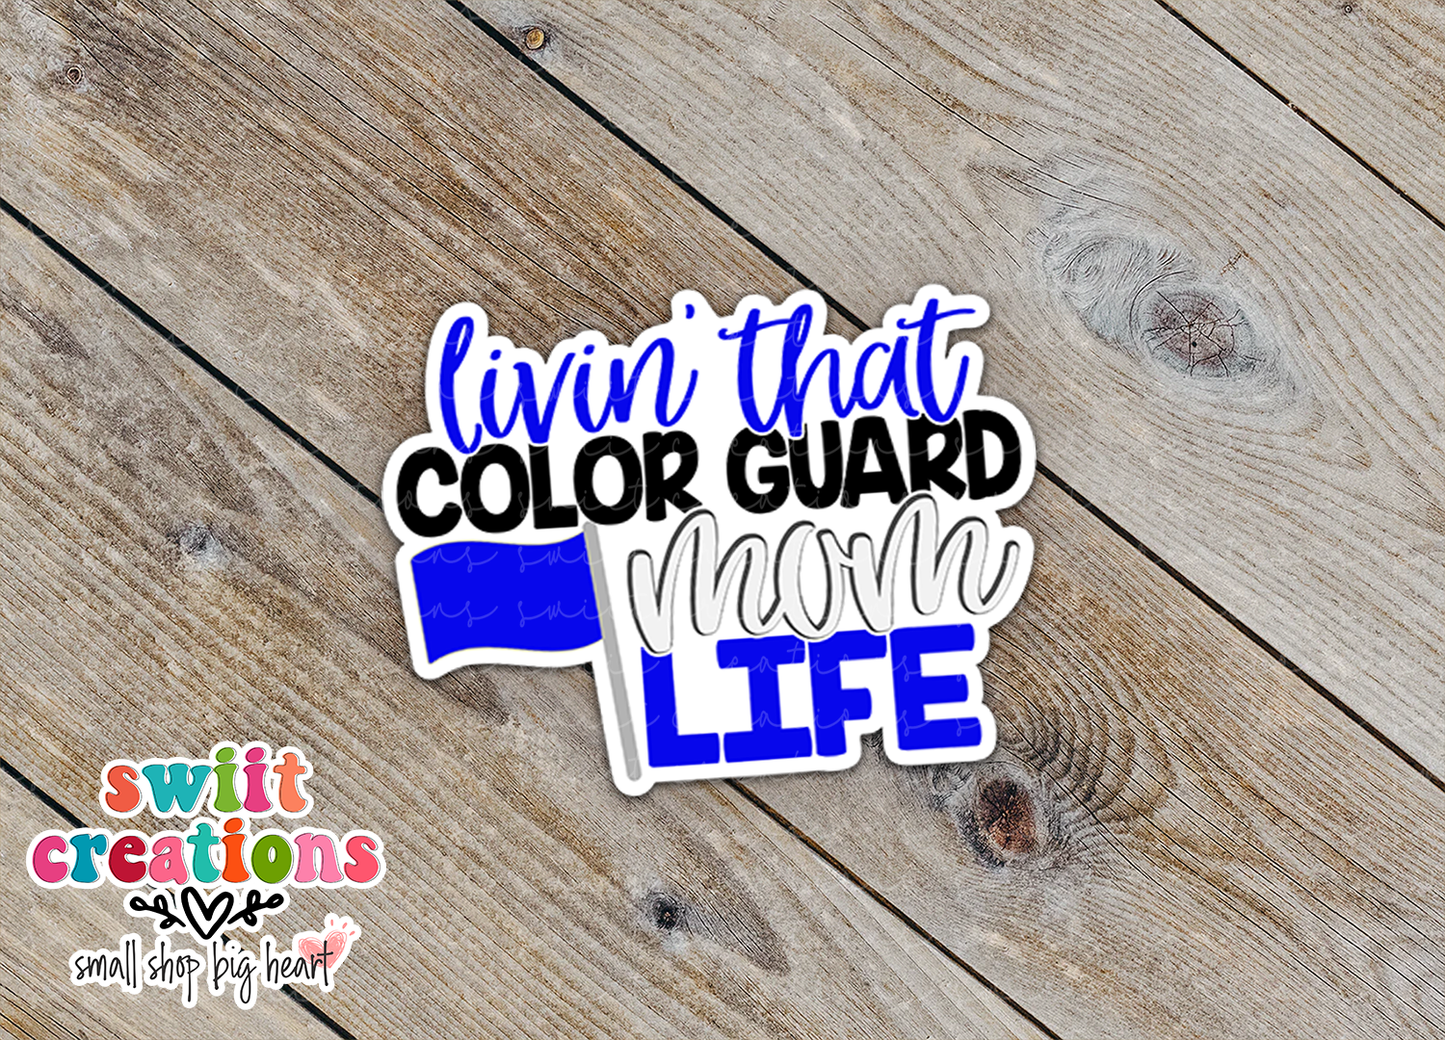 Livin' That Color Guard Mom Life Waterproof Sticker   (SS159) | SCD171